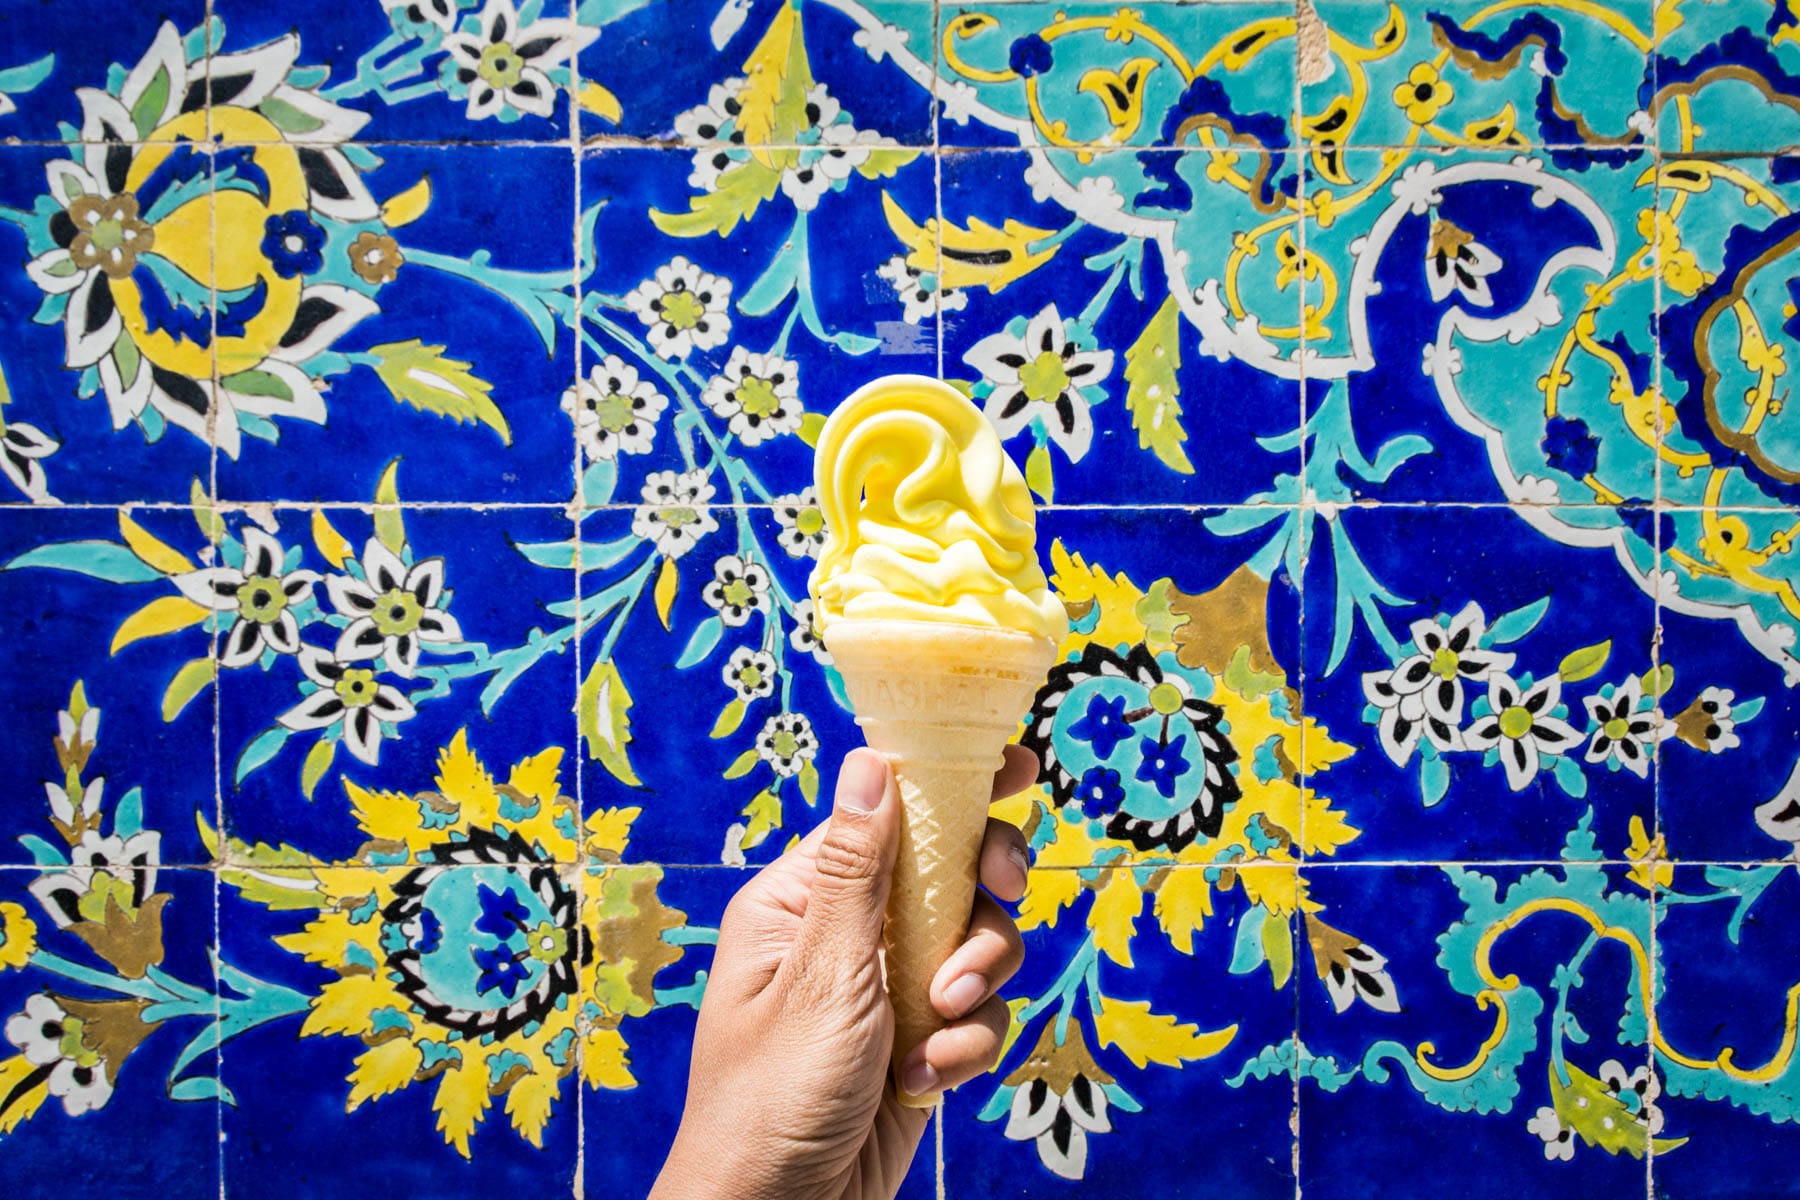 Saffron ice cream in Iran: the perfect solution to deathly heat.